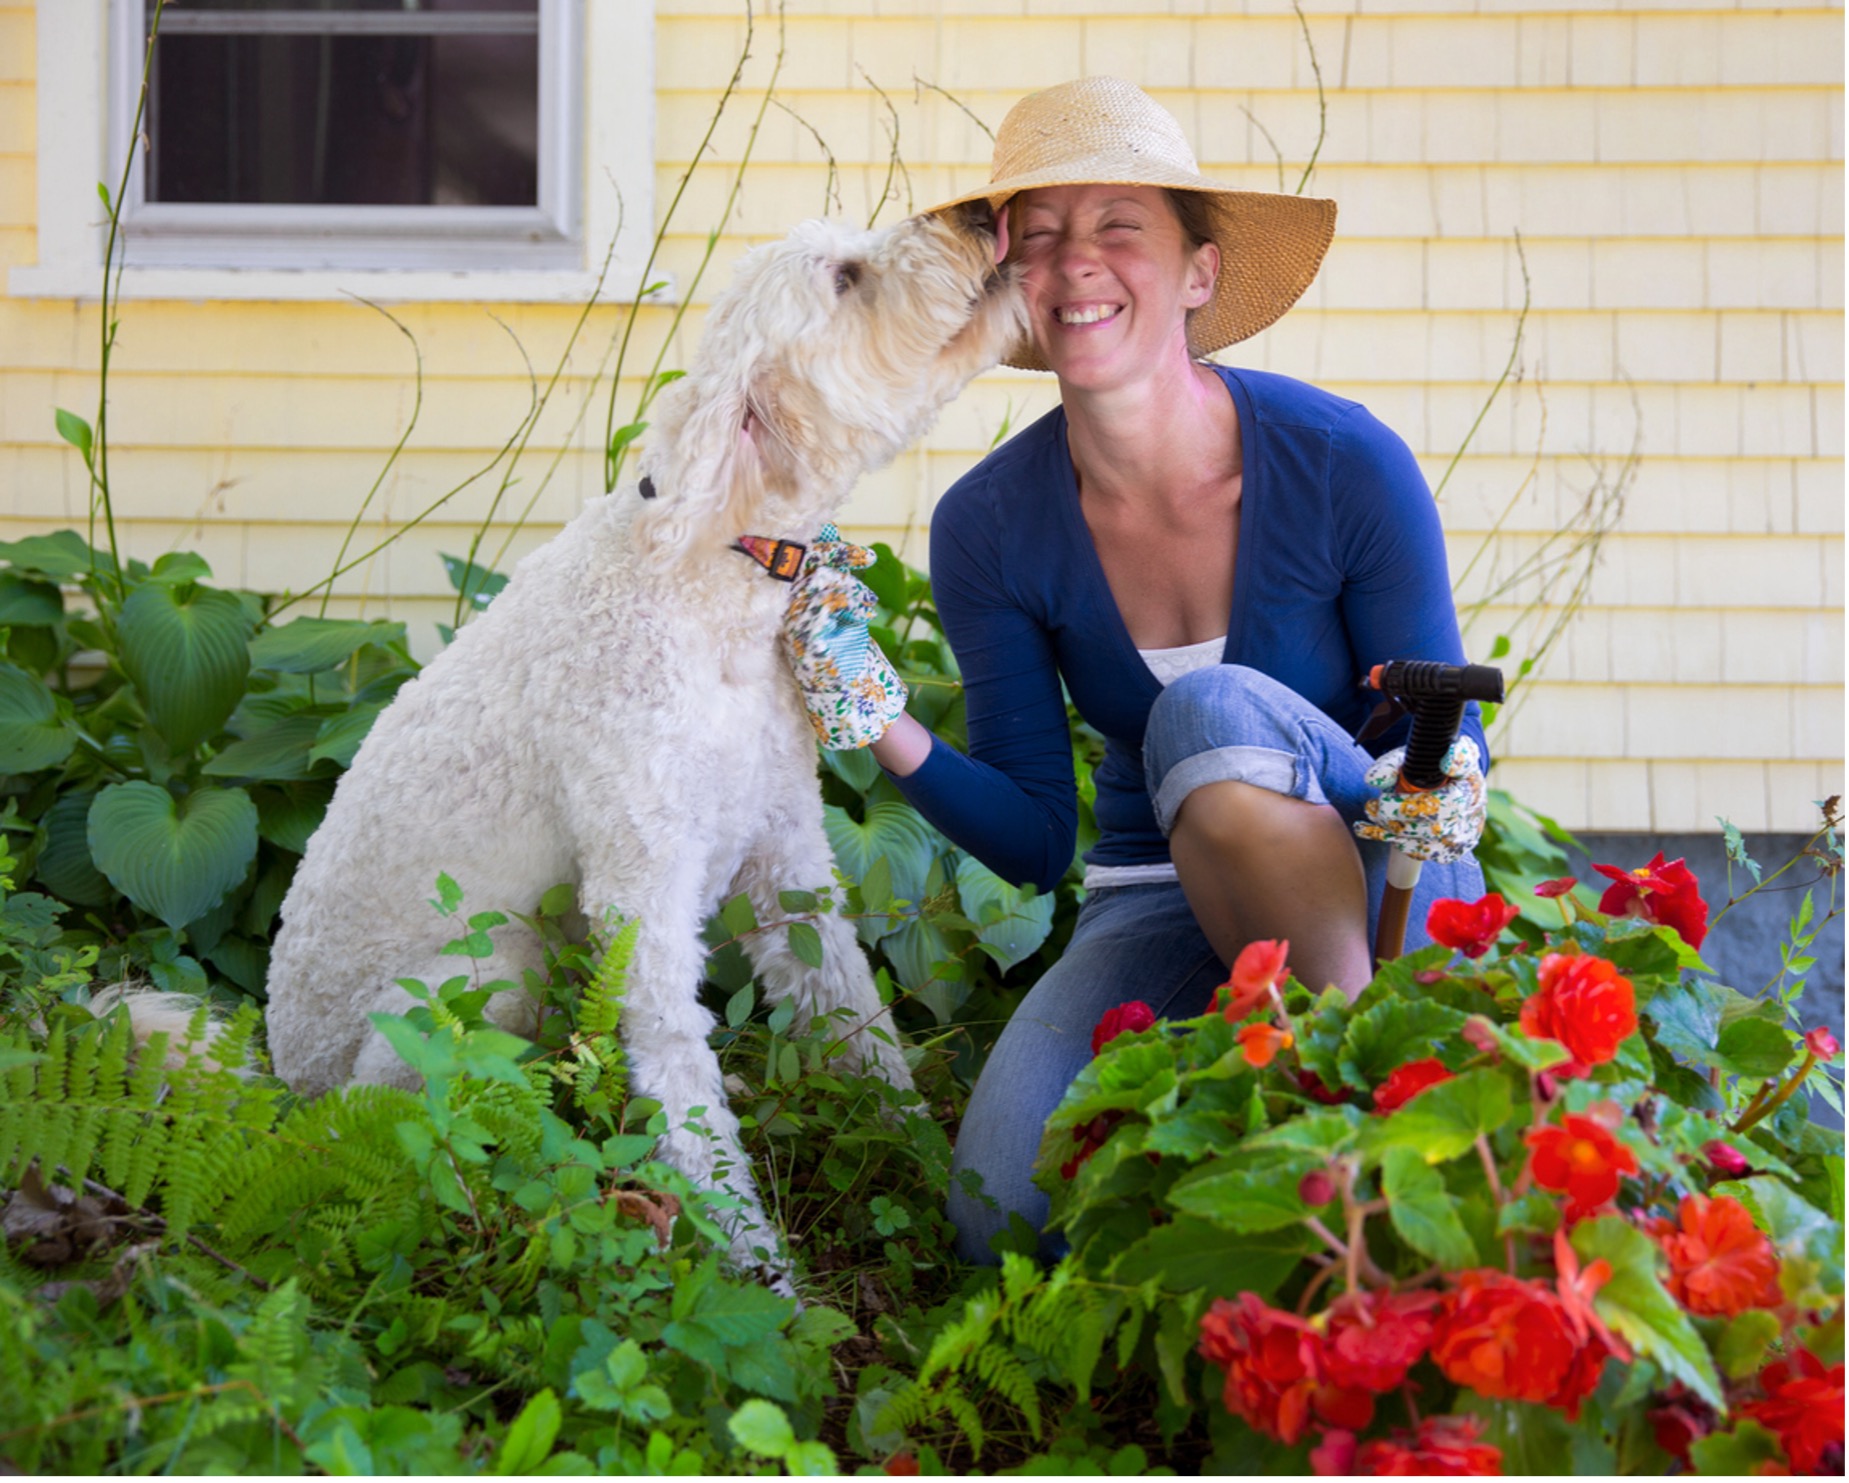 A picture containing person being licked by a dog in a pet friendly garden